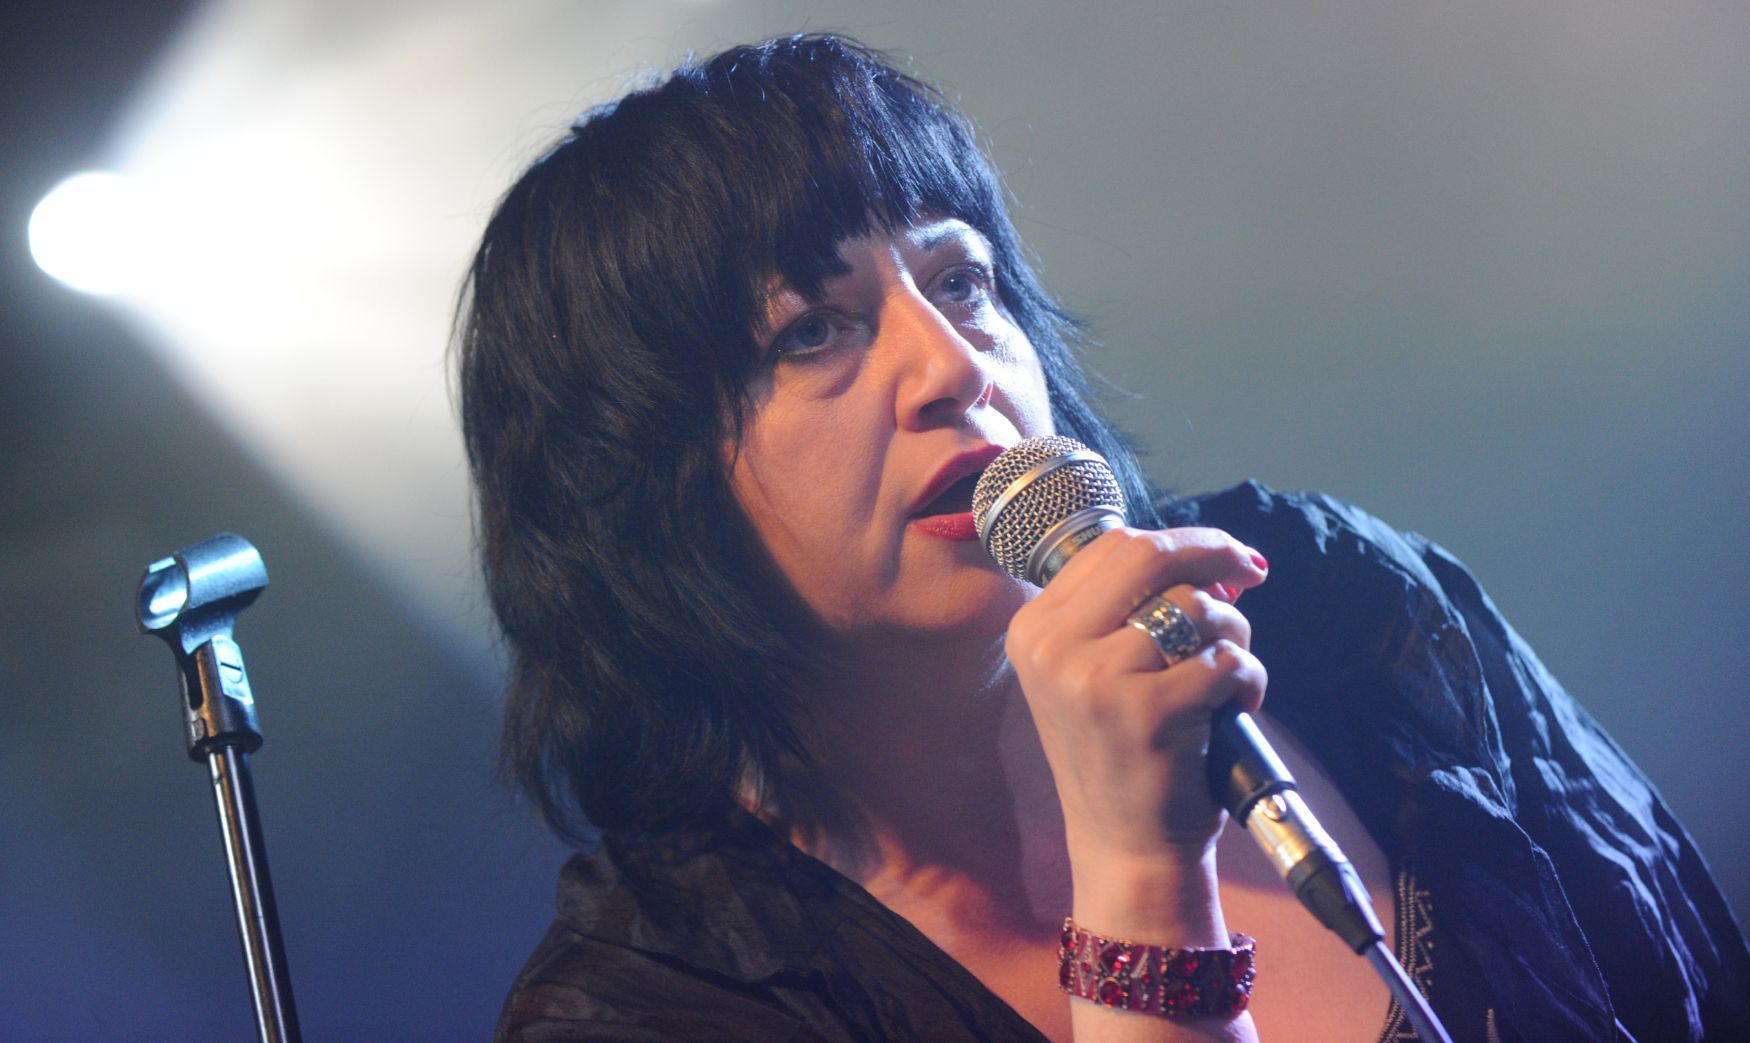 Lydia Lunch